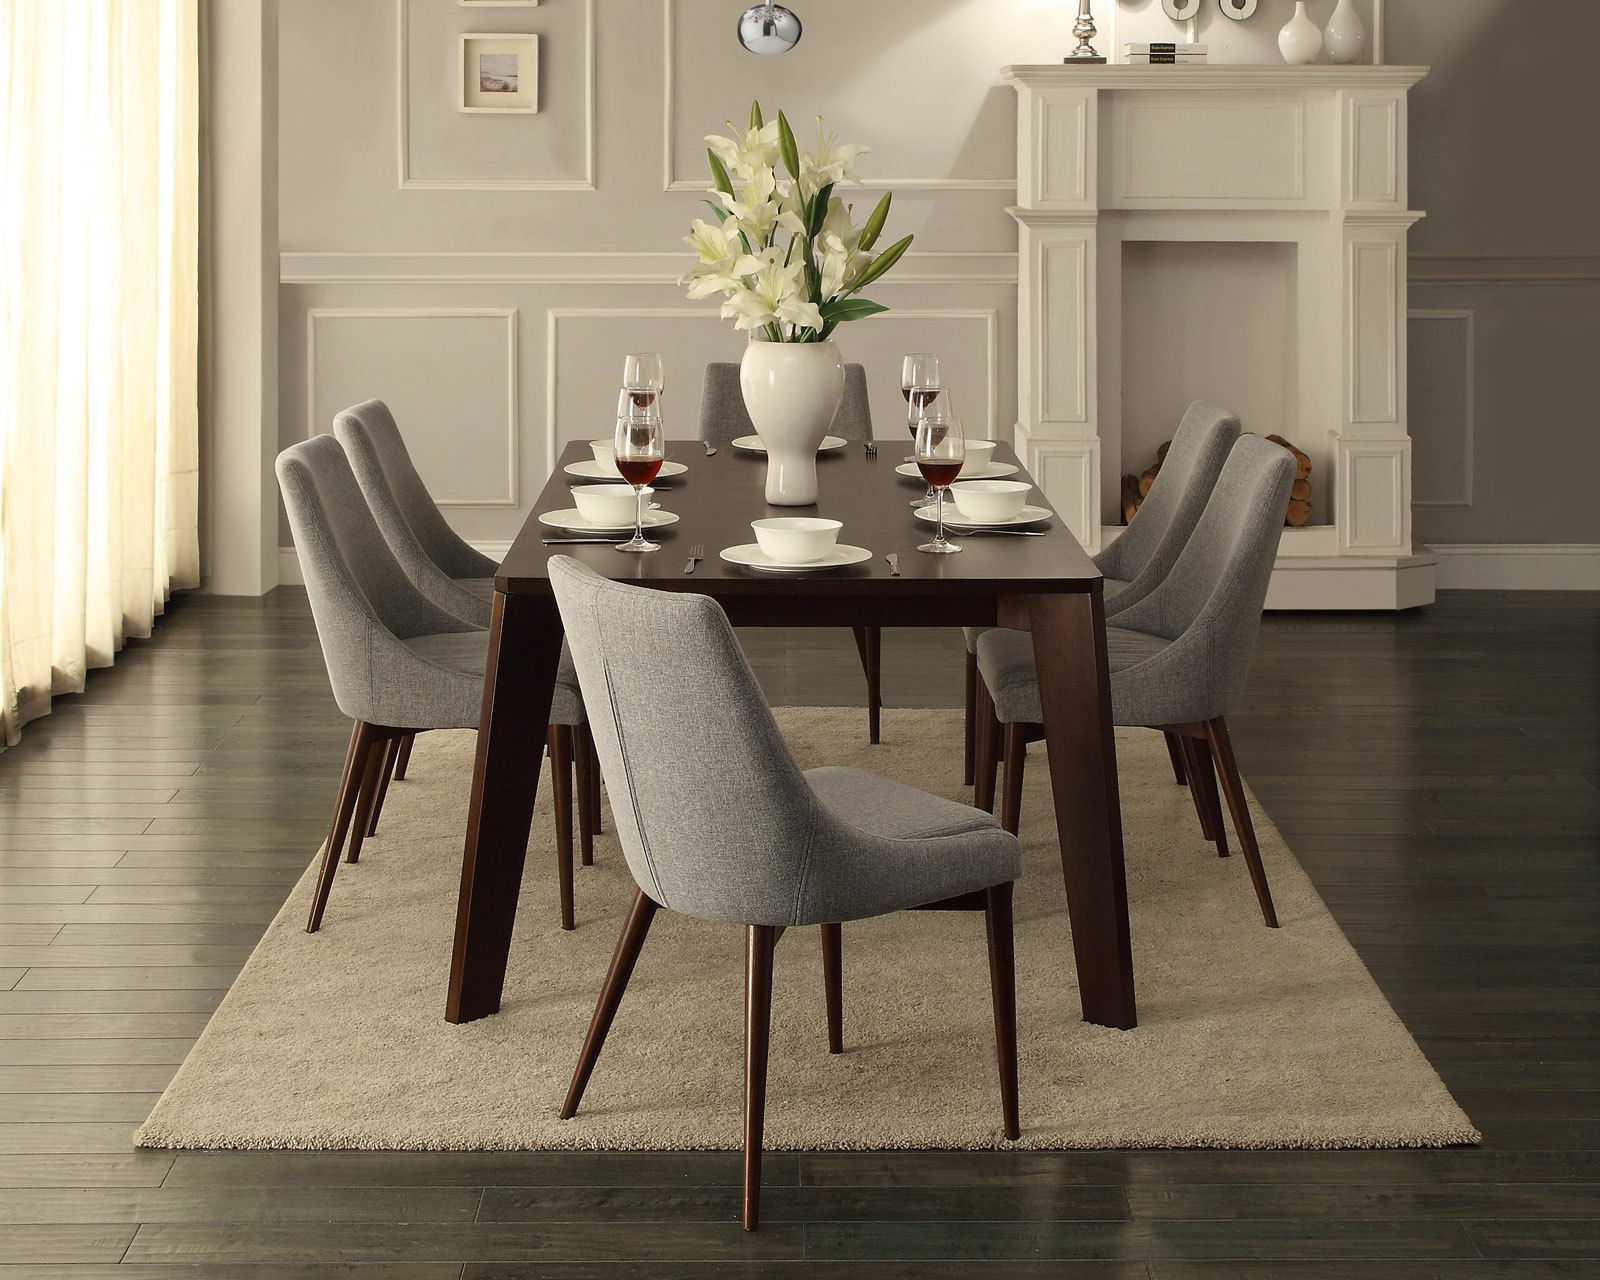 chairs for dining room table